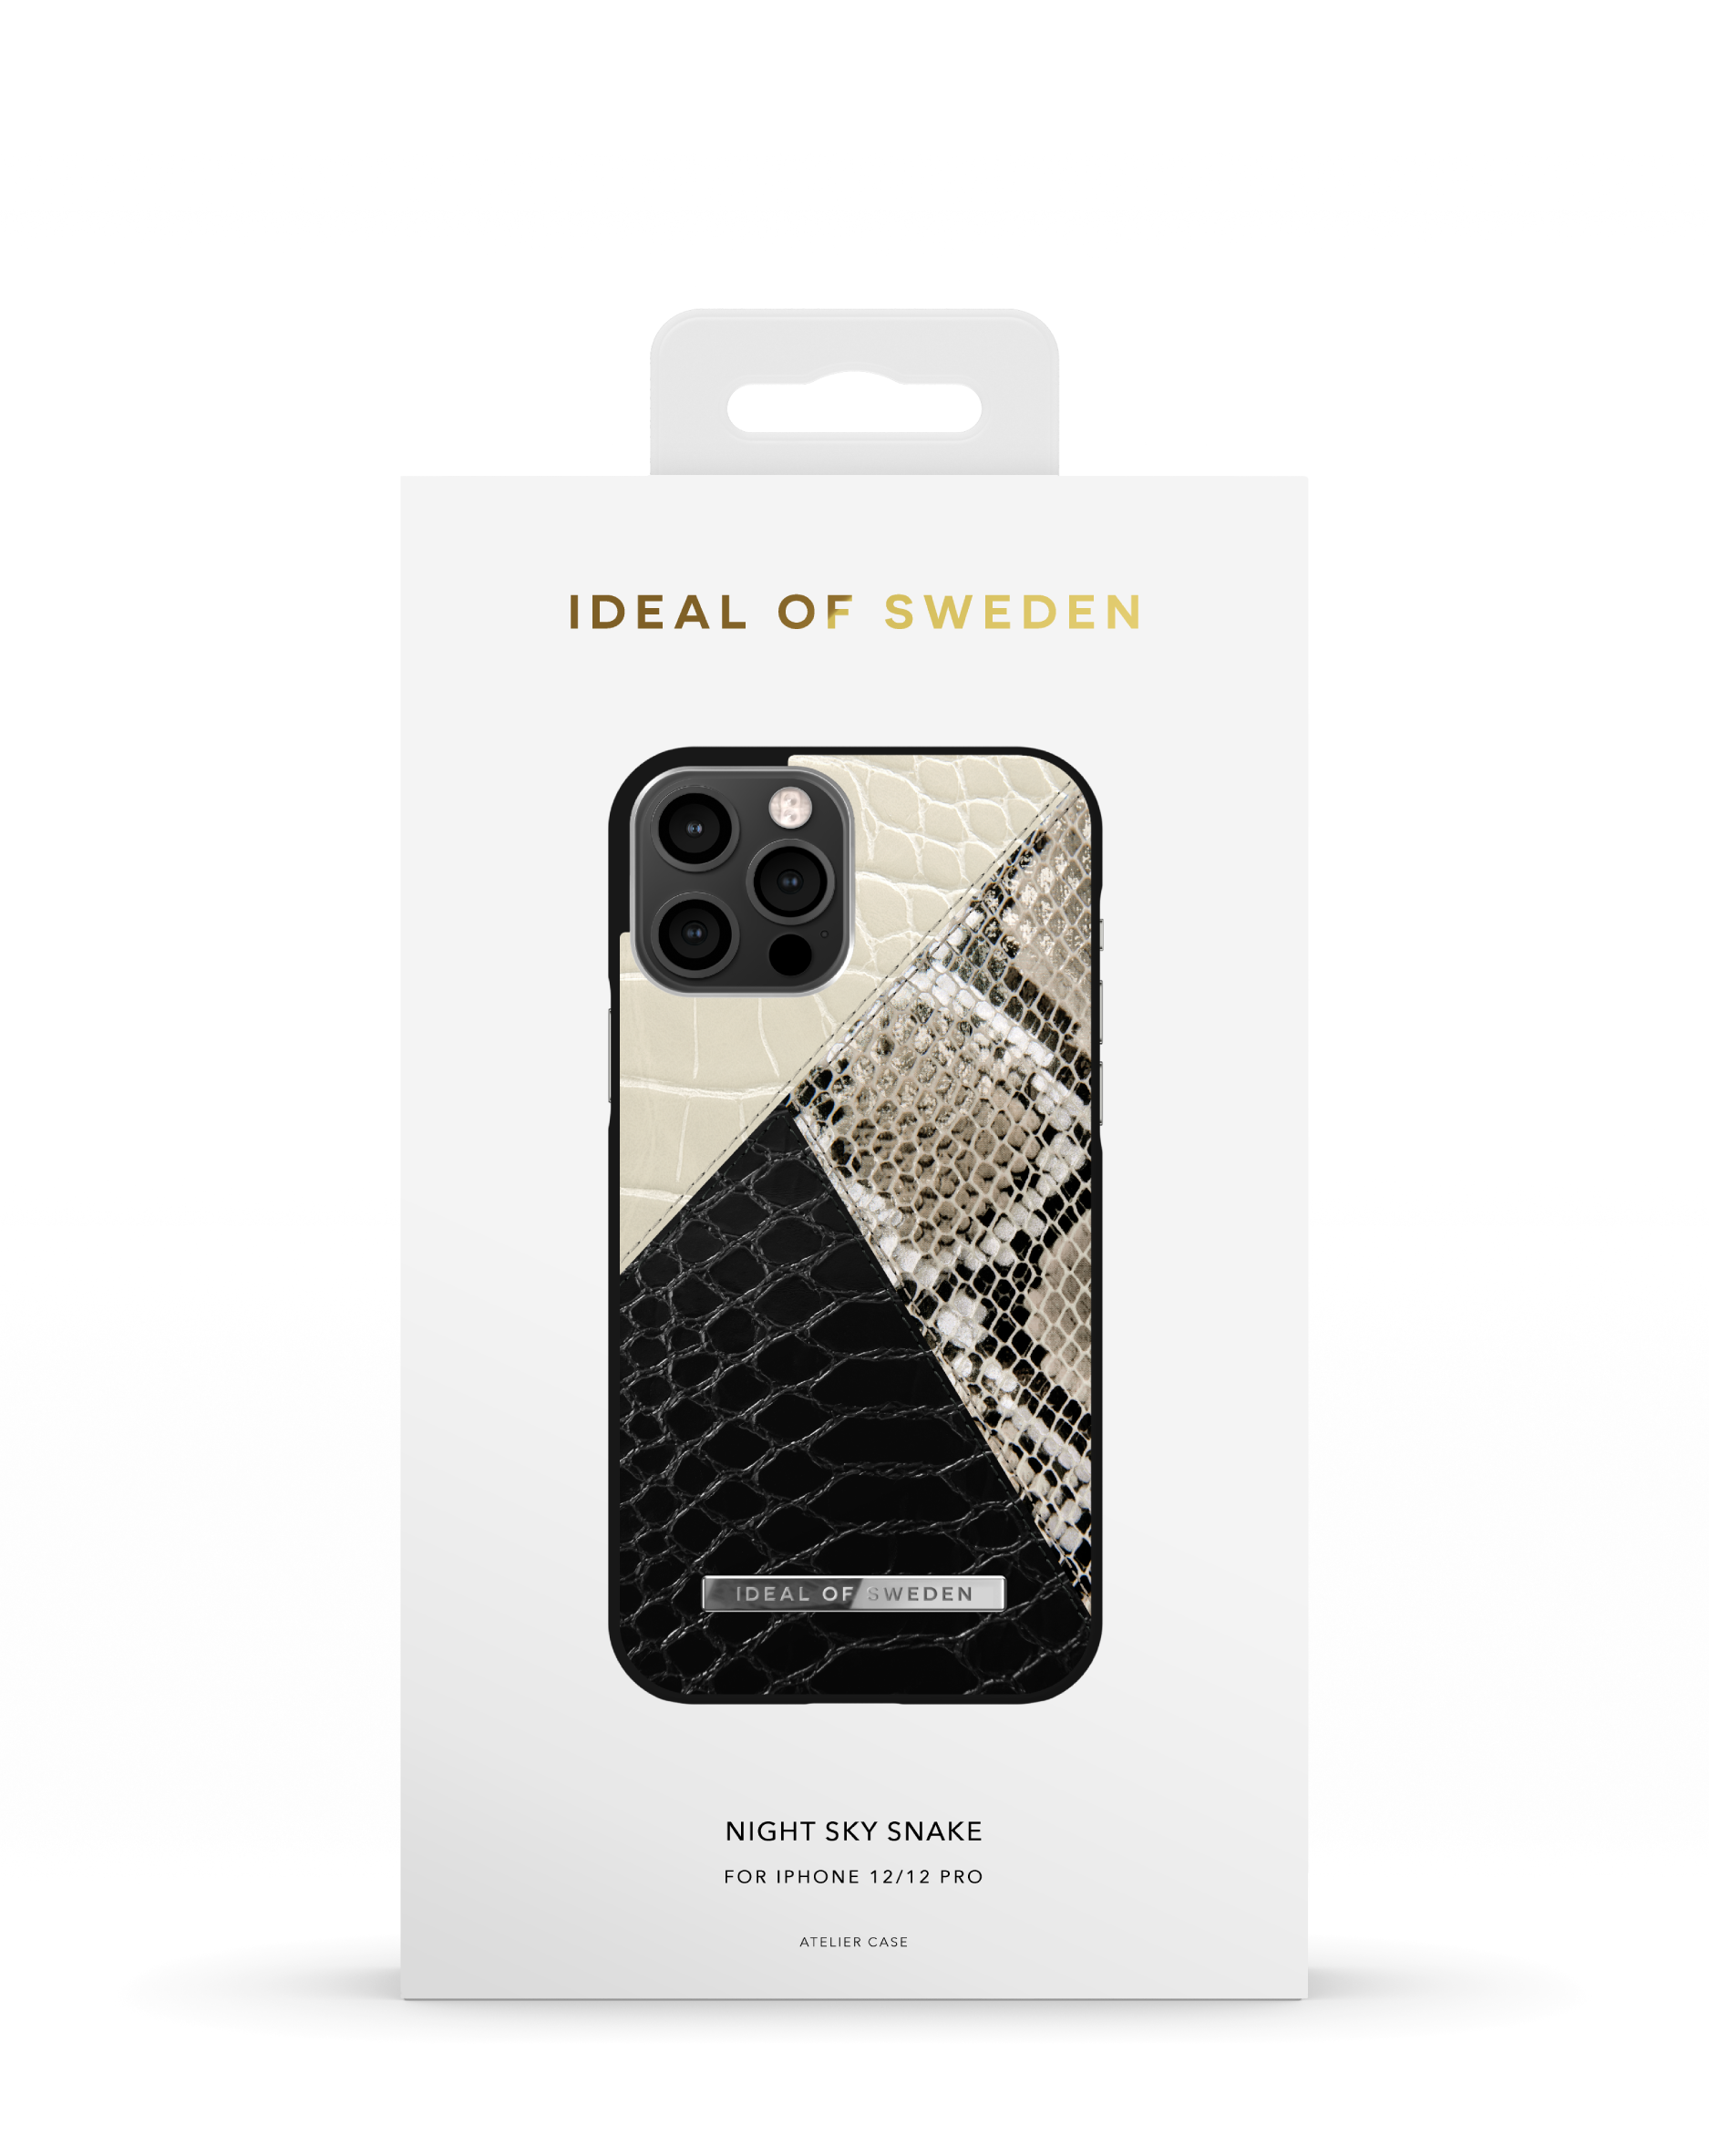 Snake Sky Apple 12 IDACSS21-I2061-271, 12, Night Apple, OF iPhone IDEAL Pro, SWEDEN iPhone Backcover, Apple